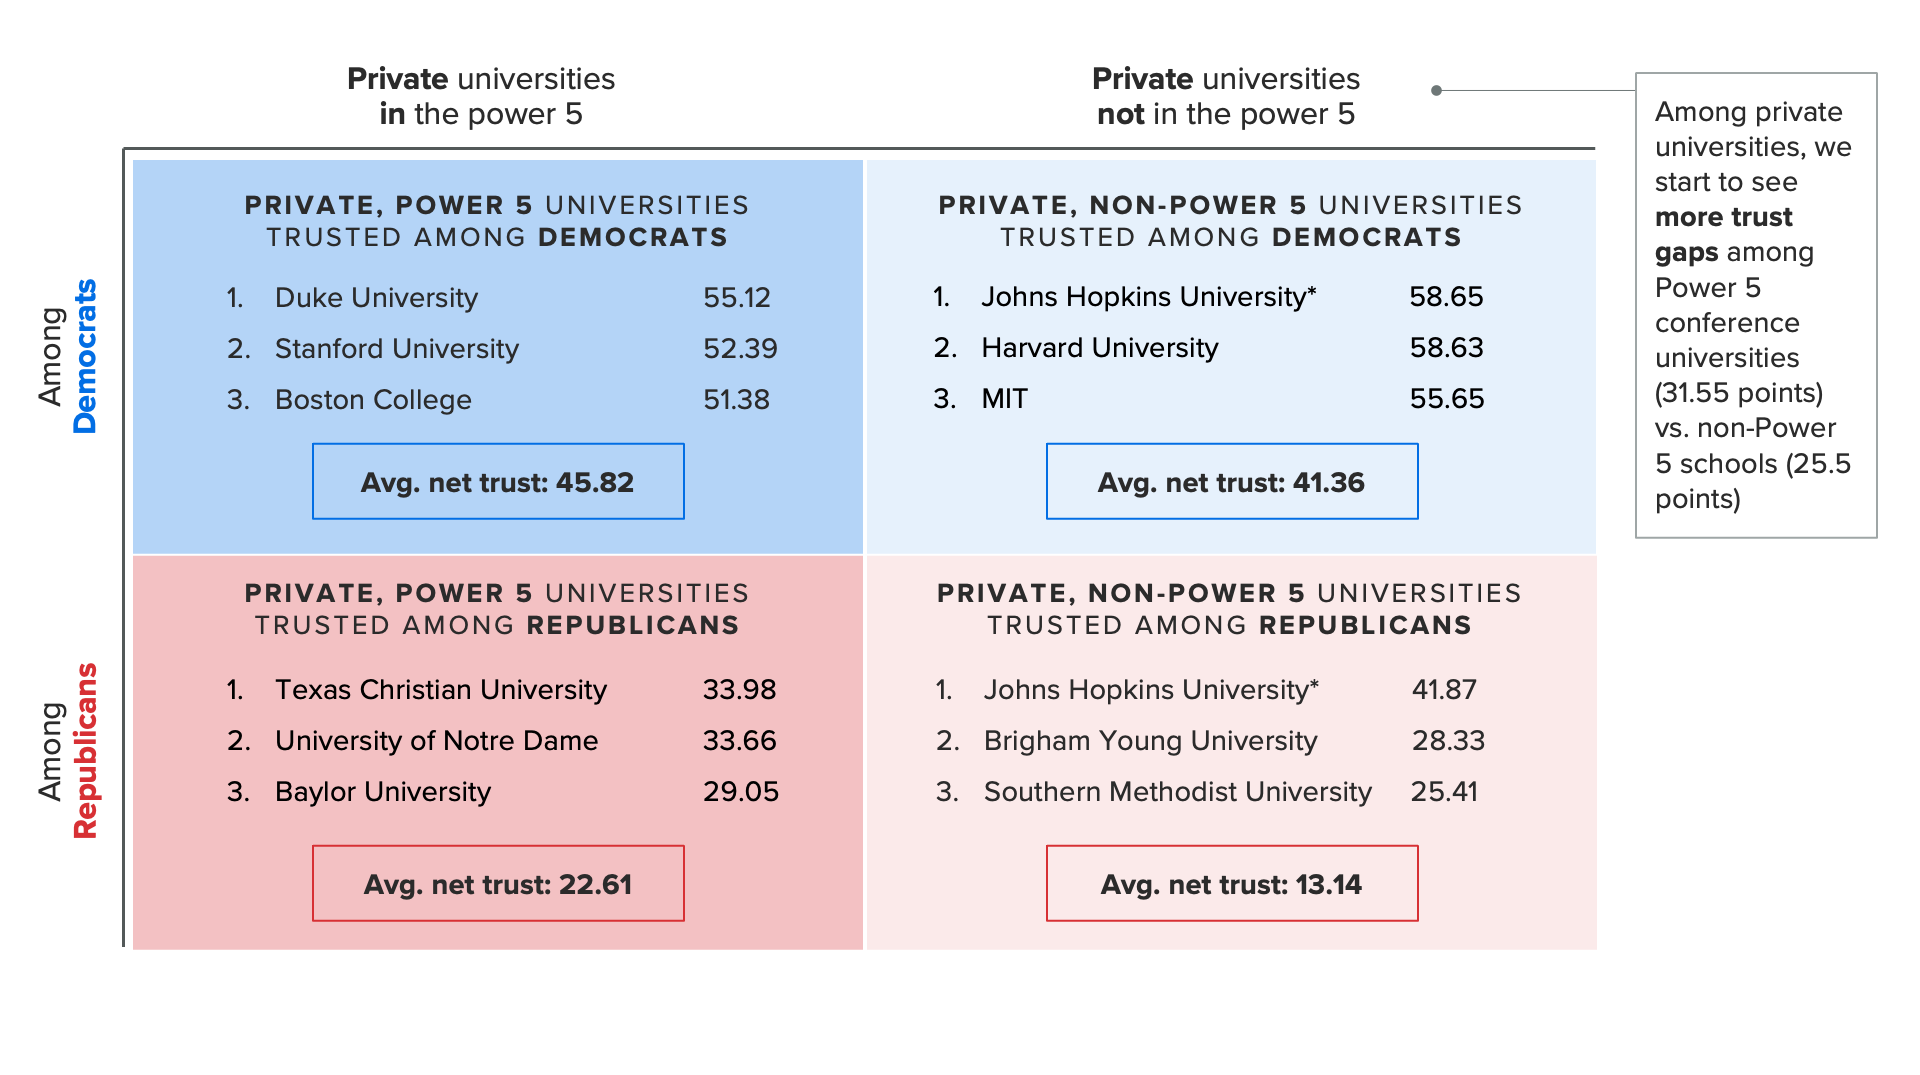 Table of the most trusted private universities within and not within Power Five conferences, showing the Power Five bump is more prominent among Republicans for private universities.